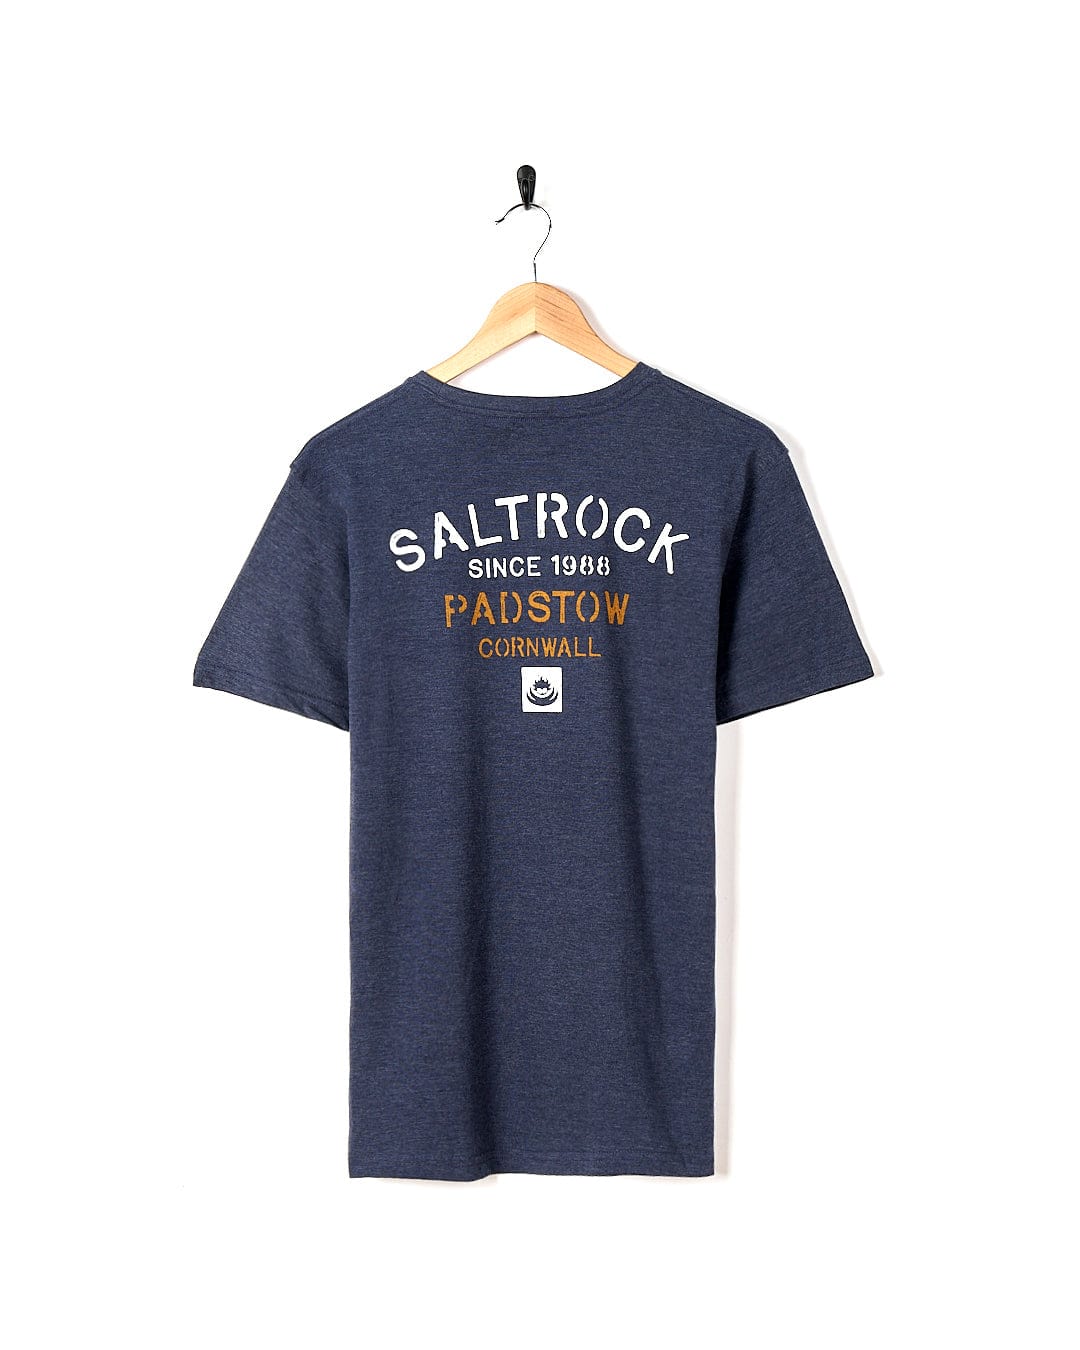 A Stencil - Location T-Shirt - Padstow - Blue with the brand name Saltrock on it.